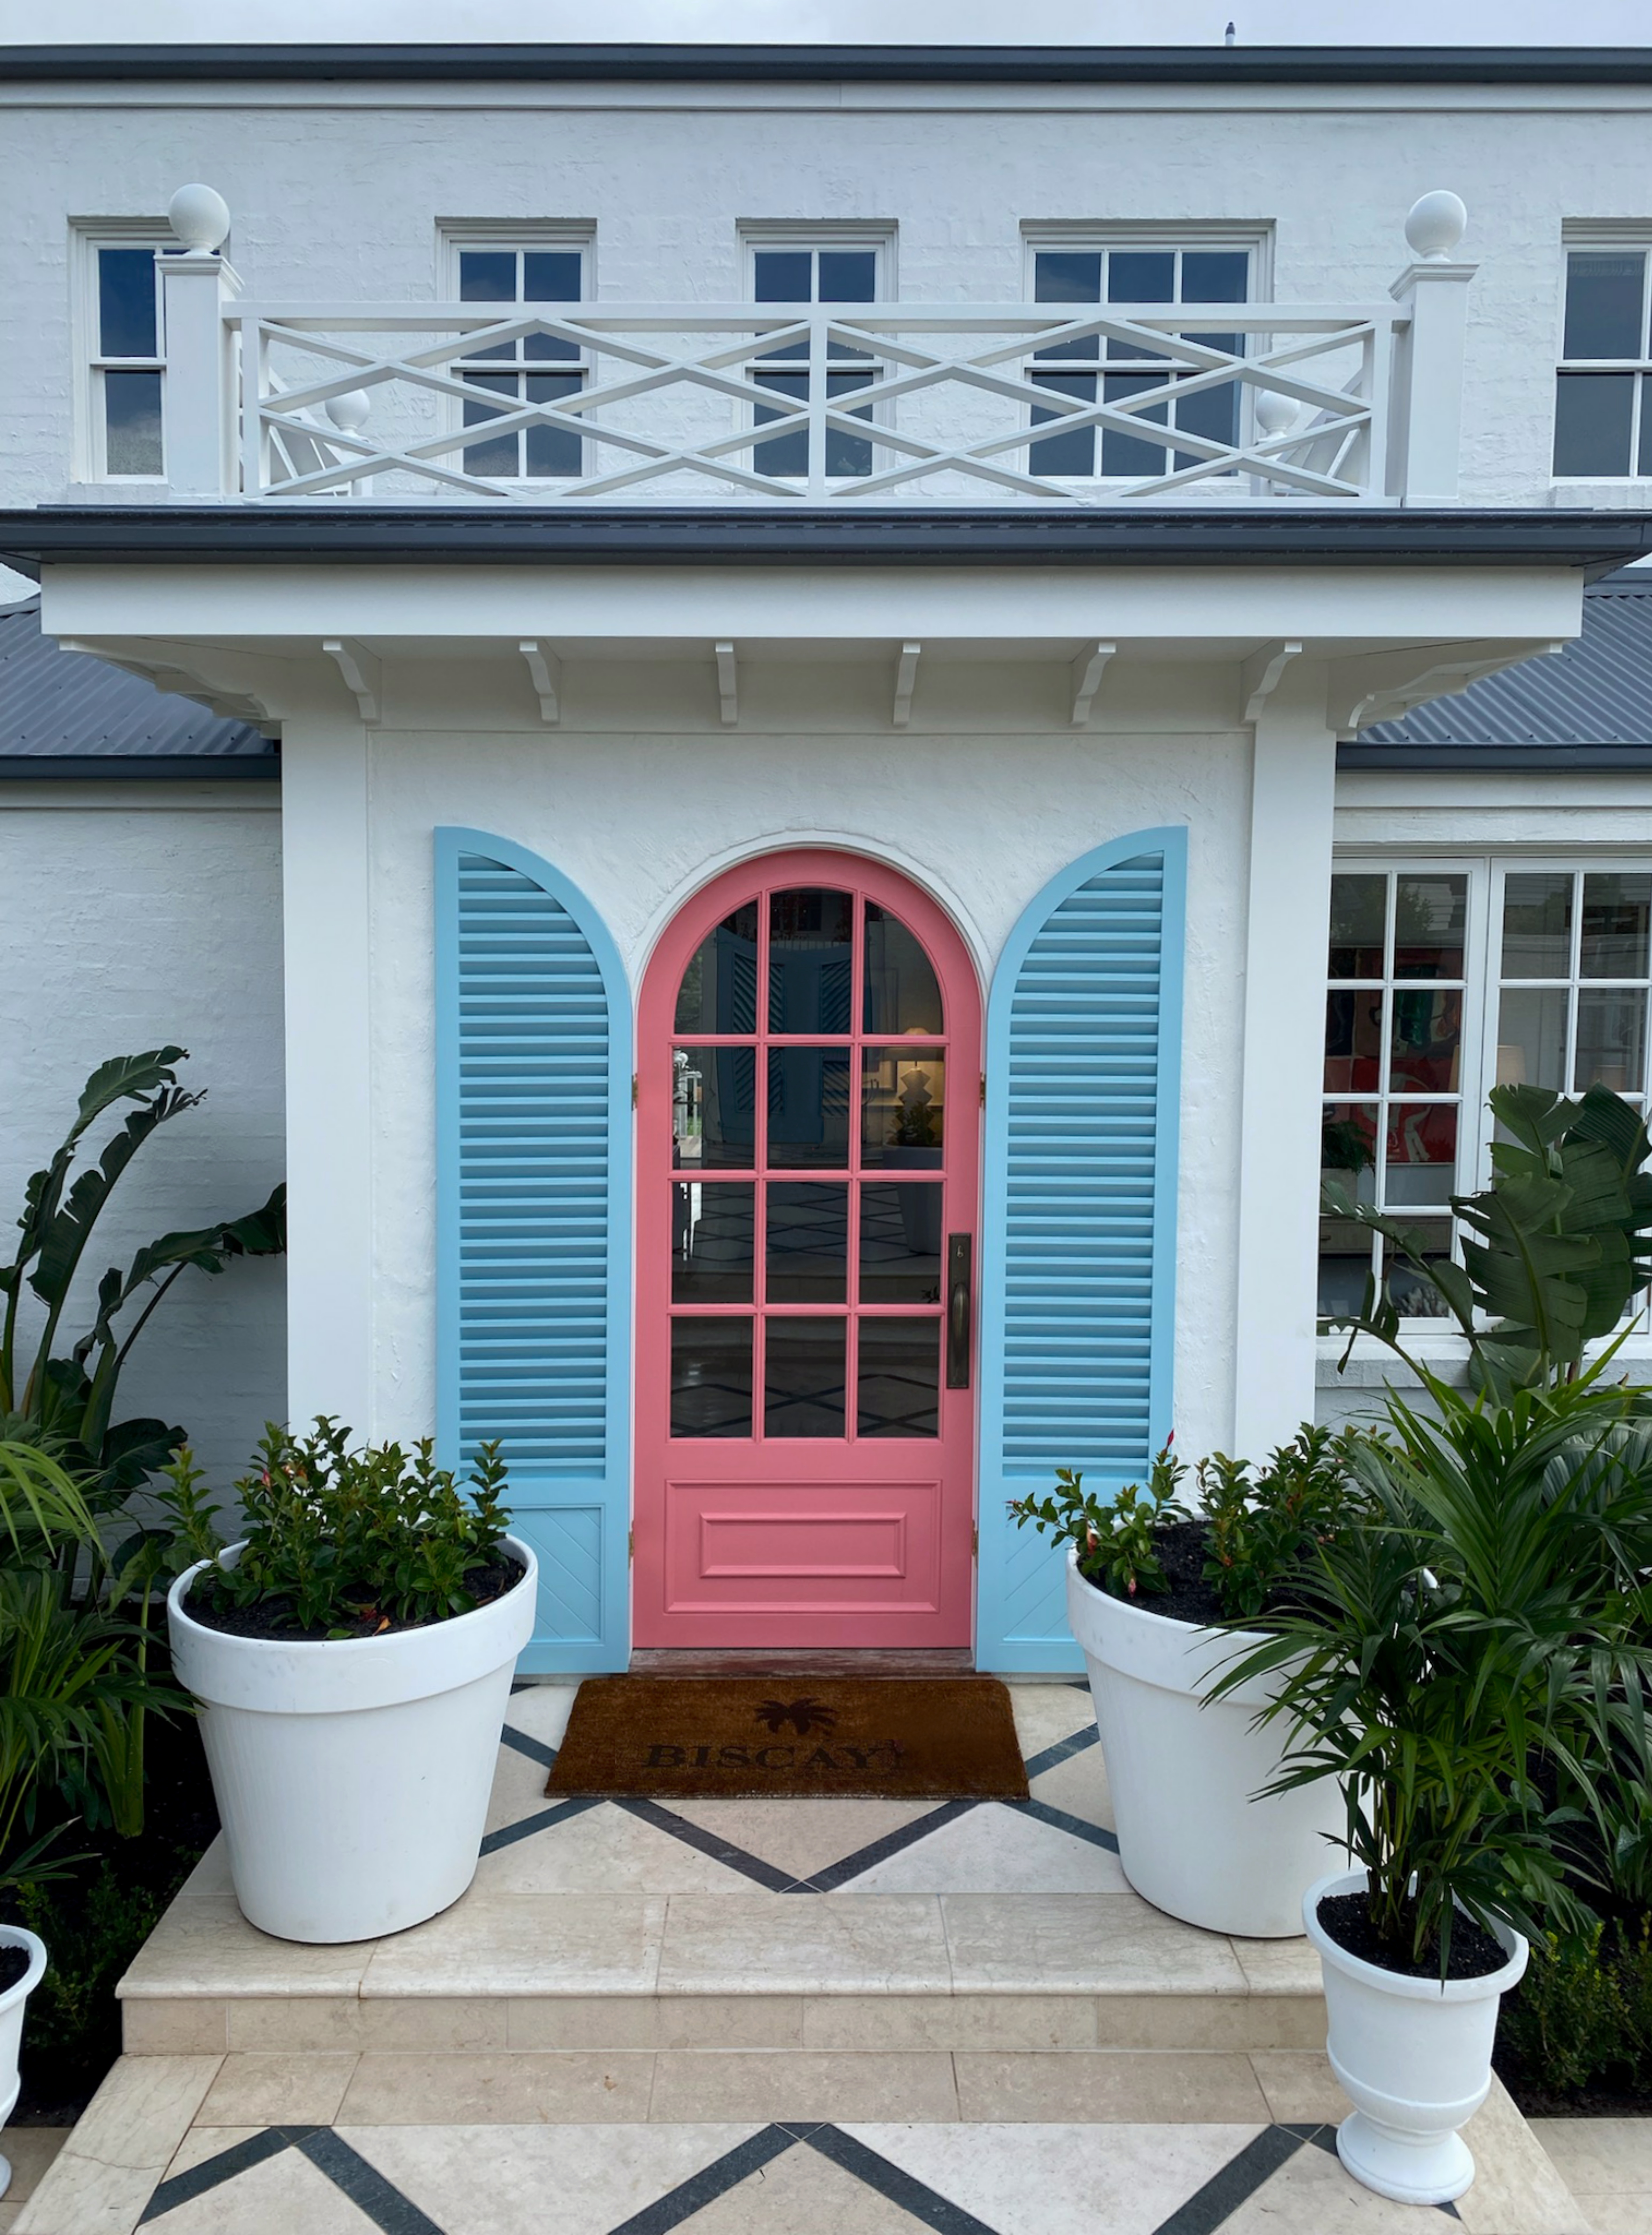 Custom curved shutters and door